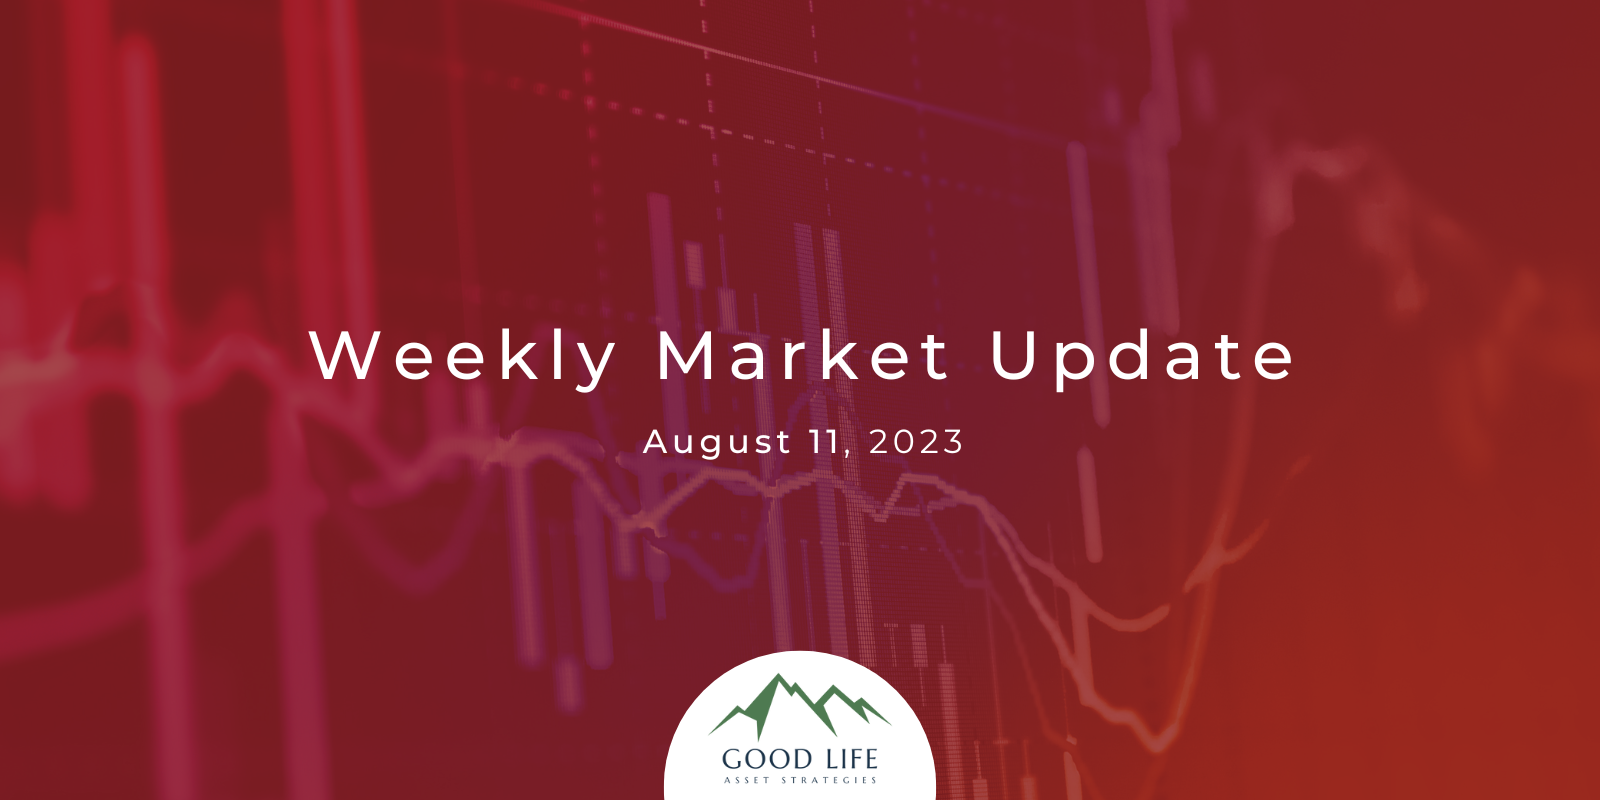 Weekly Market Update for August 11, 2023, from DeWayne Hall: Stock indexes have potential as market rally slows